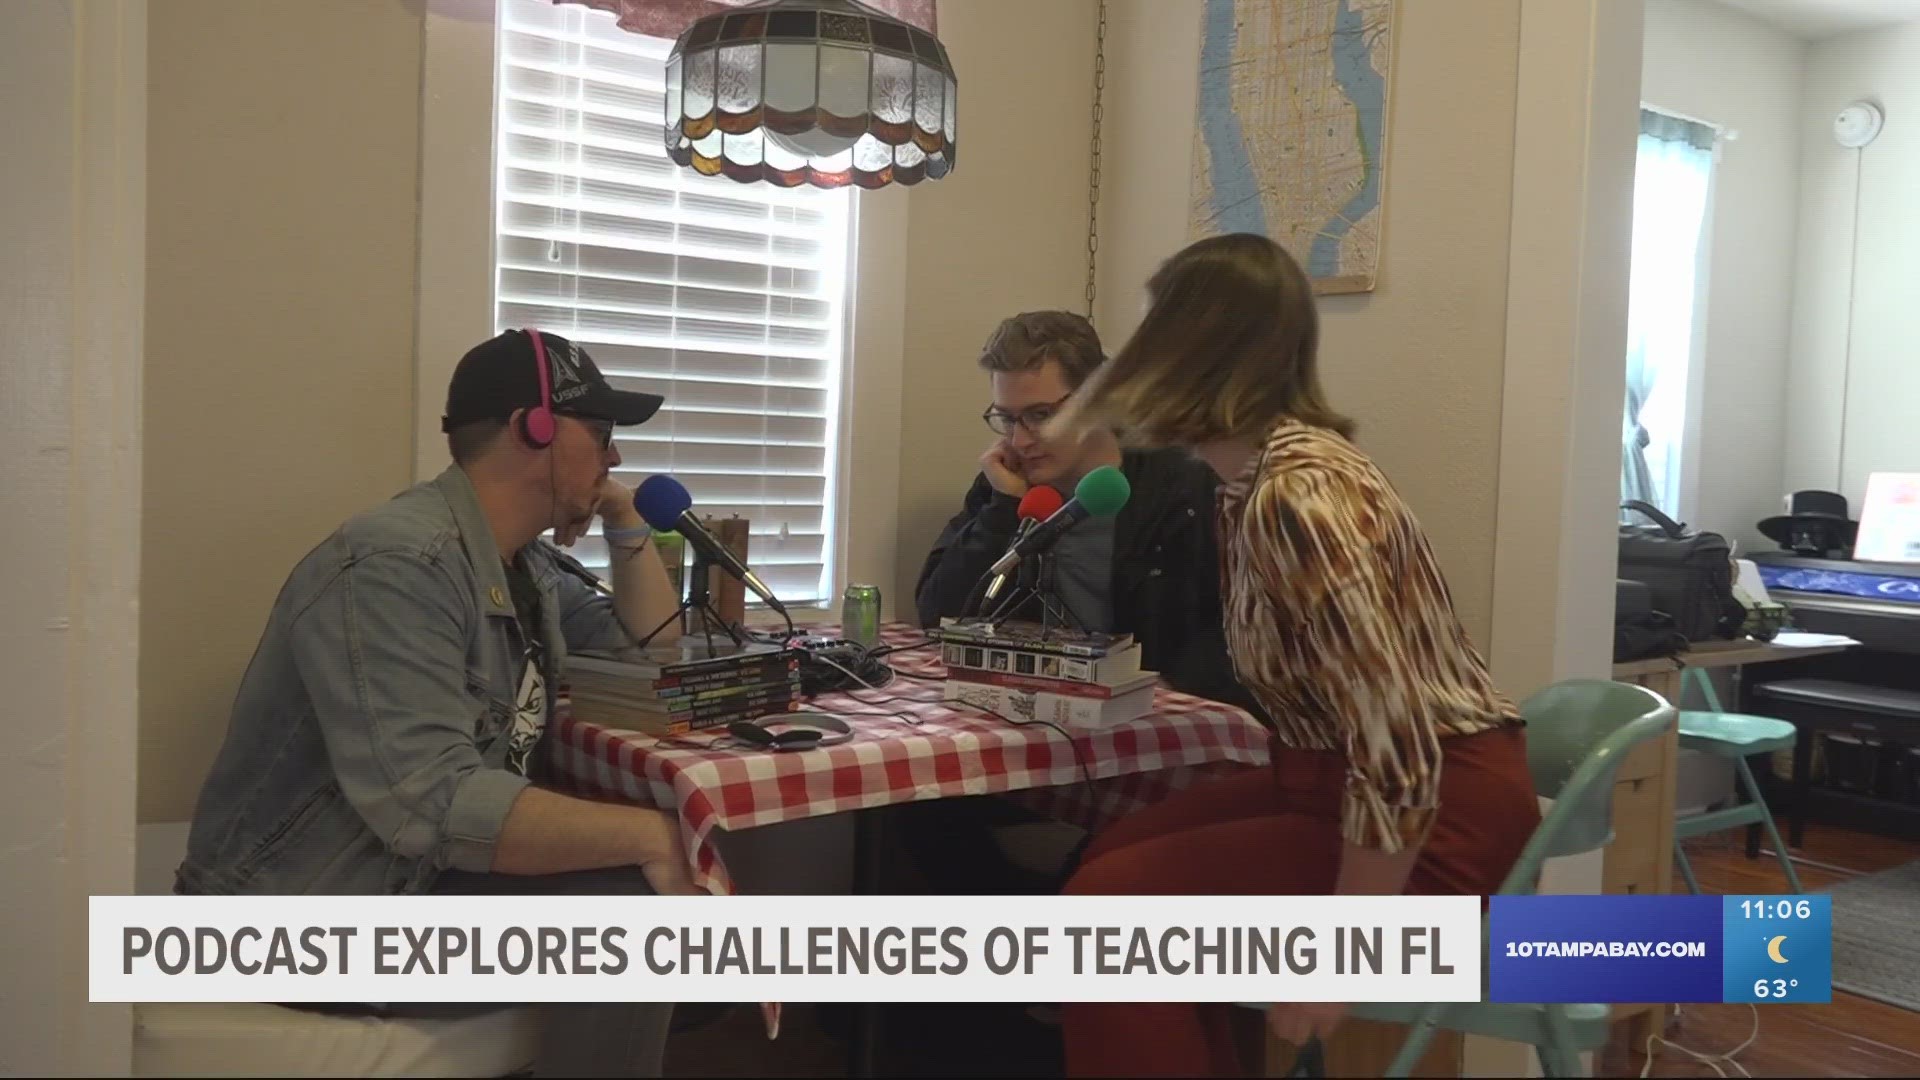 Their goal is to share firsthand insight into educating in Florida.